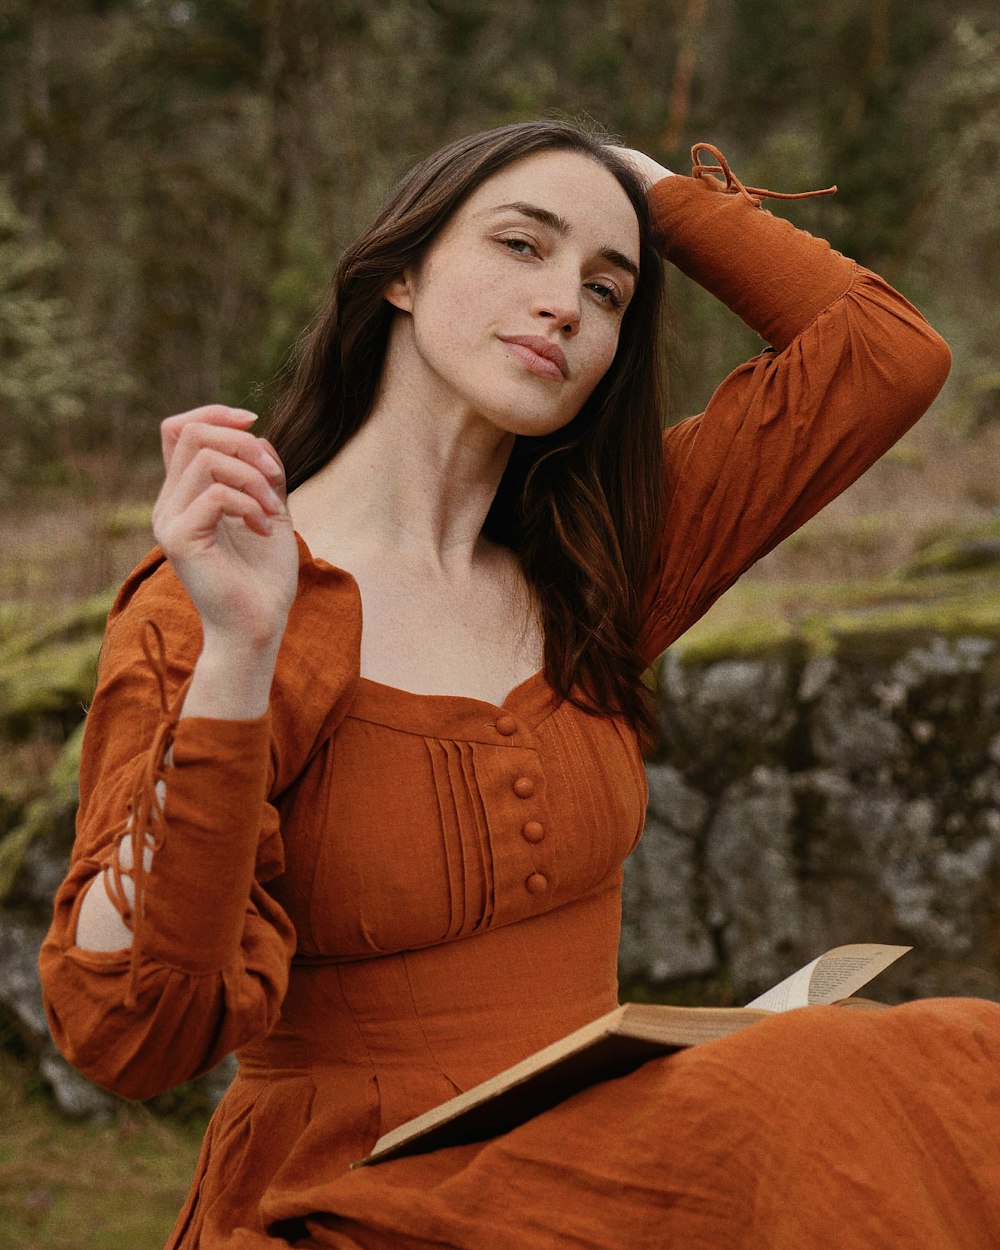 a woman in an orange dress is holding a book